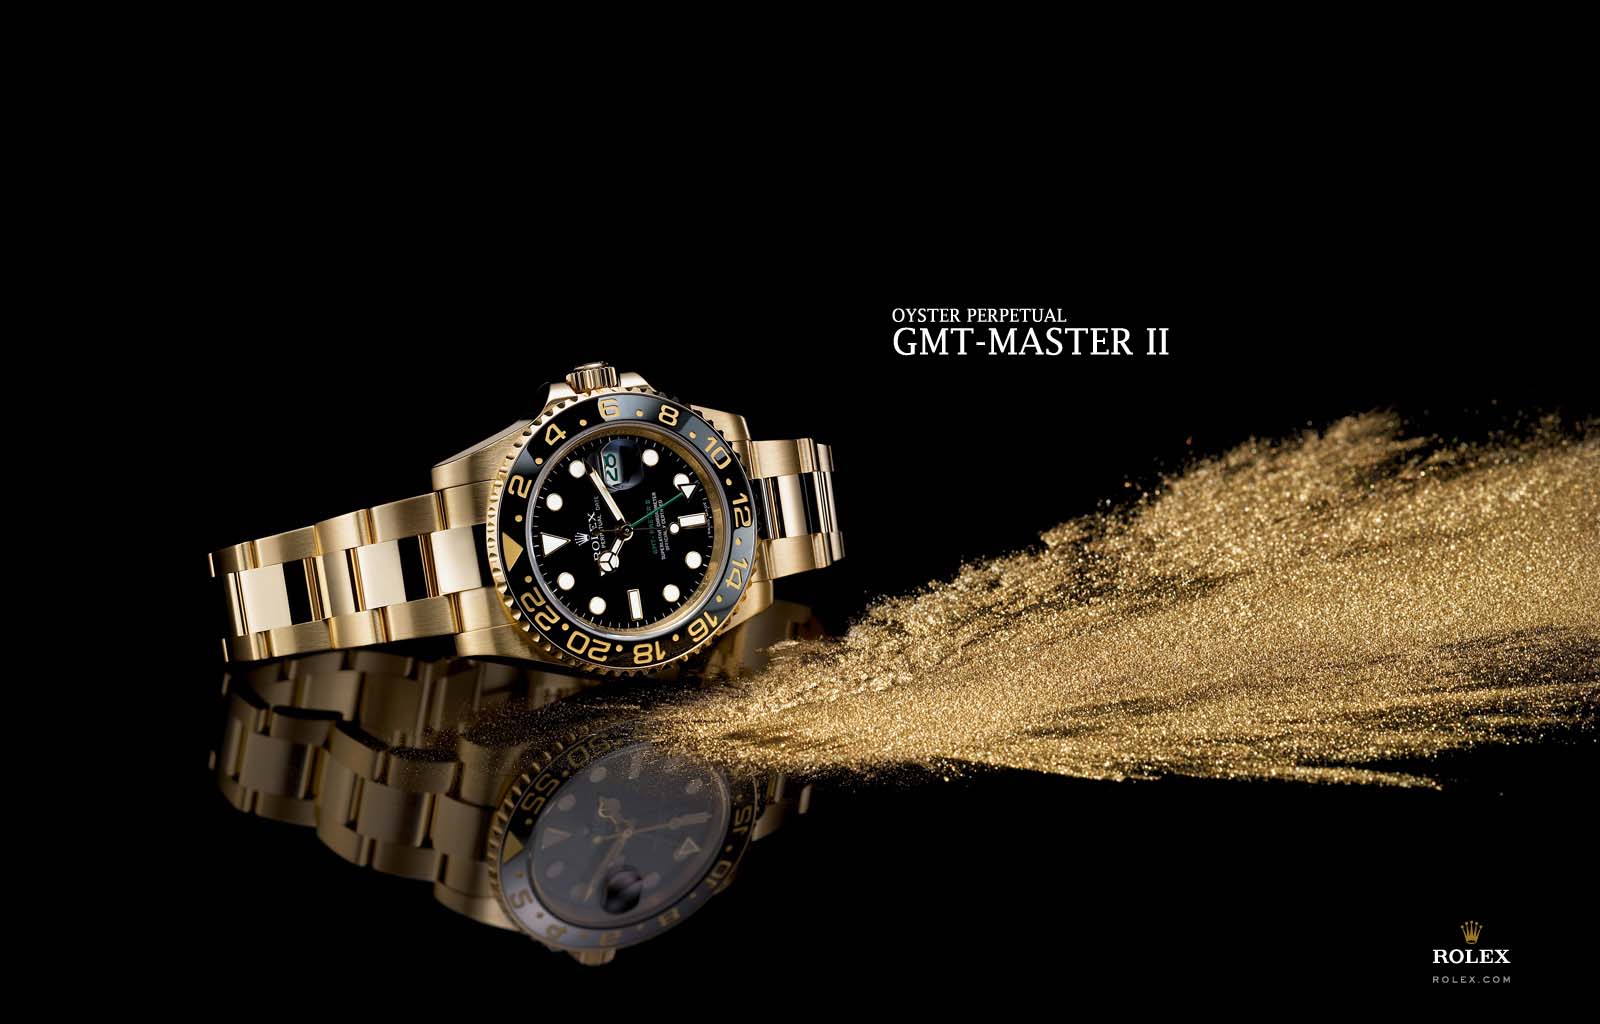 MILLION OF WALLPAPERS.COM: ROLEX WATCHES WALLPAPERS